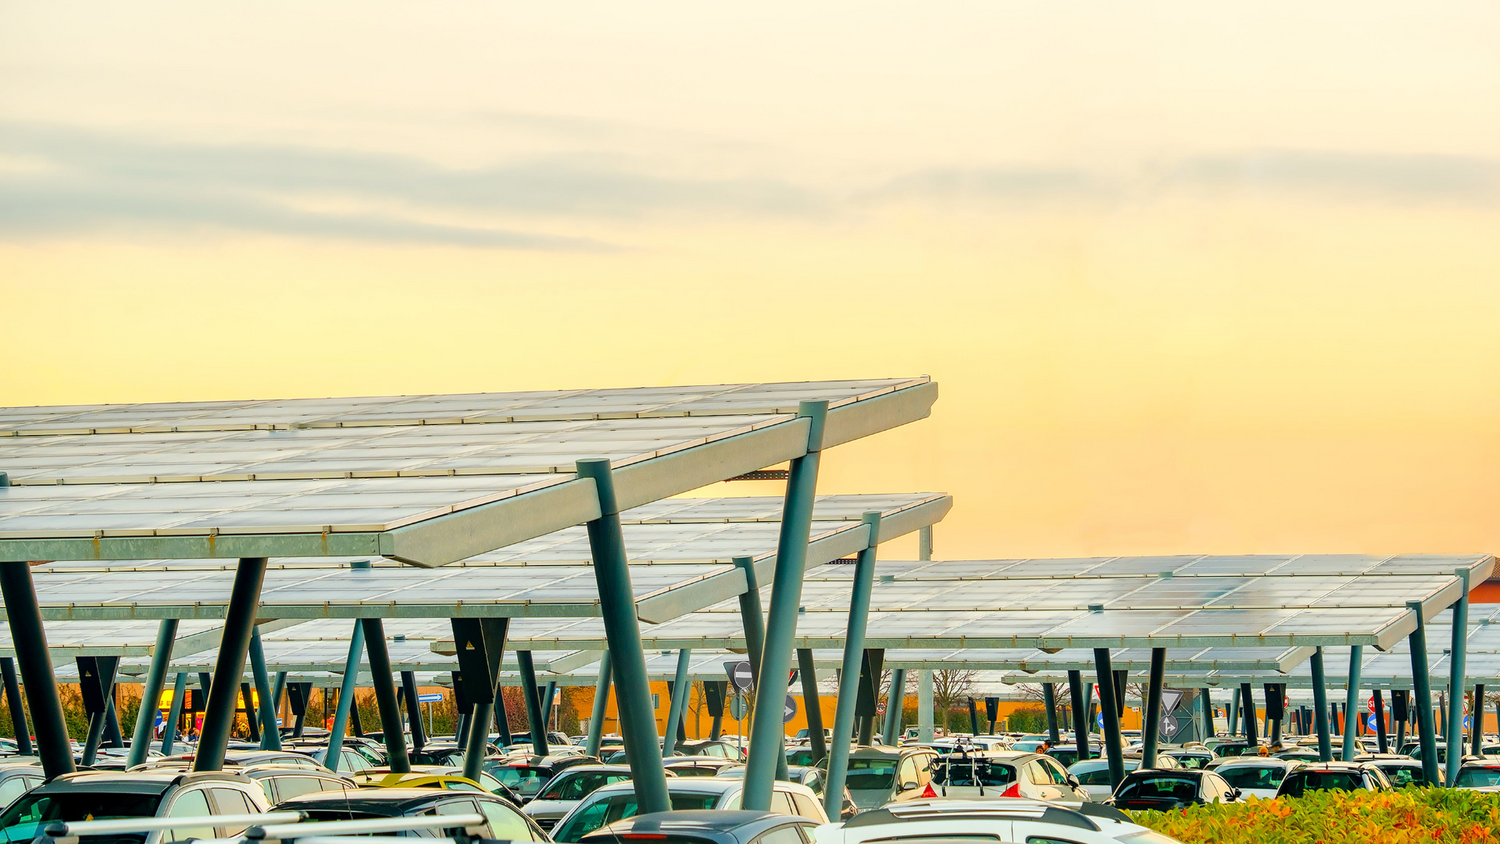 Turning parking lots into EV charging lots with direct-connected DC-to-DC solar canopies